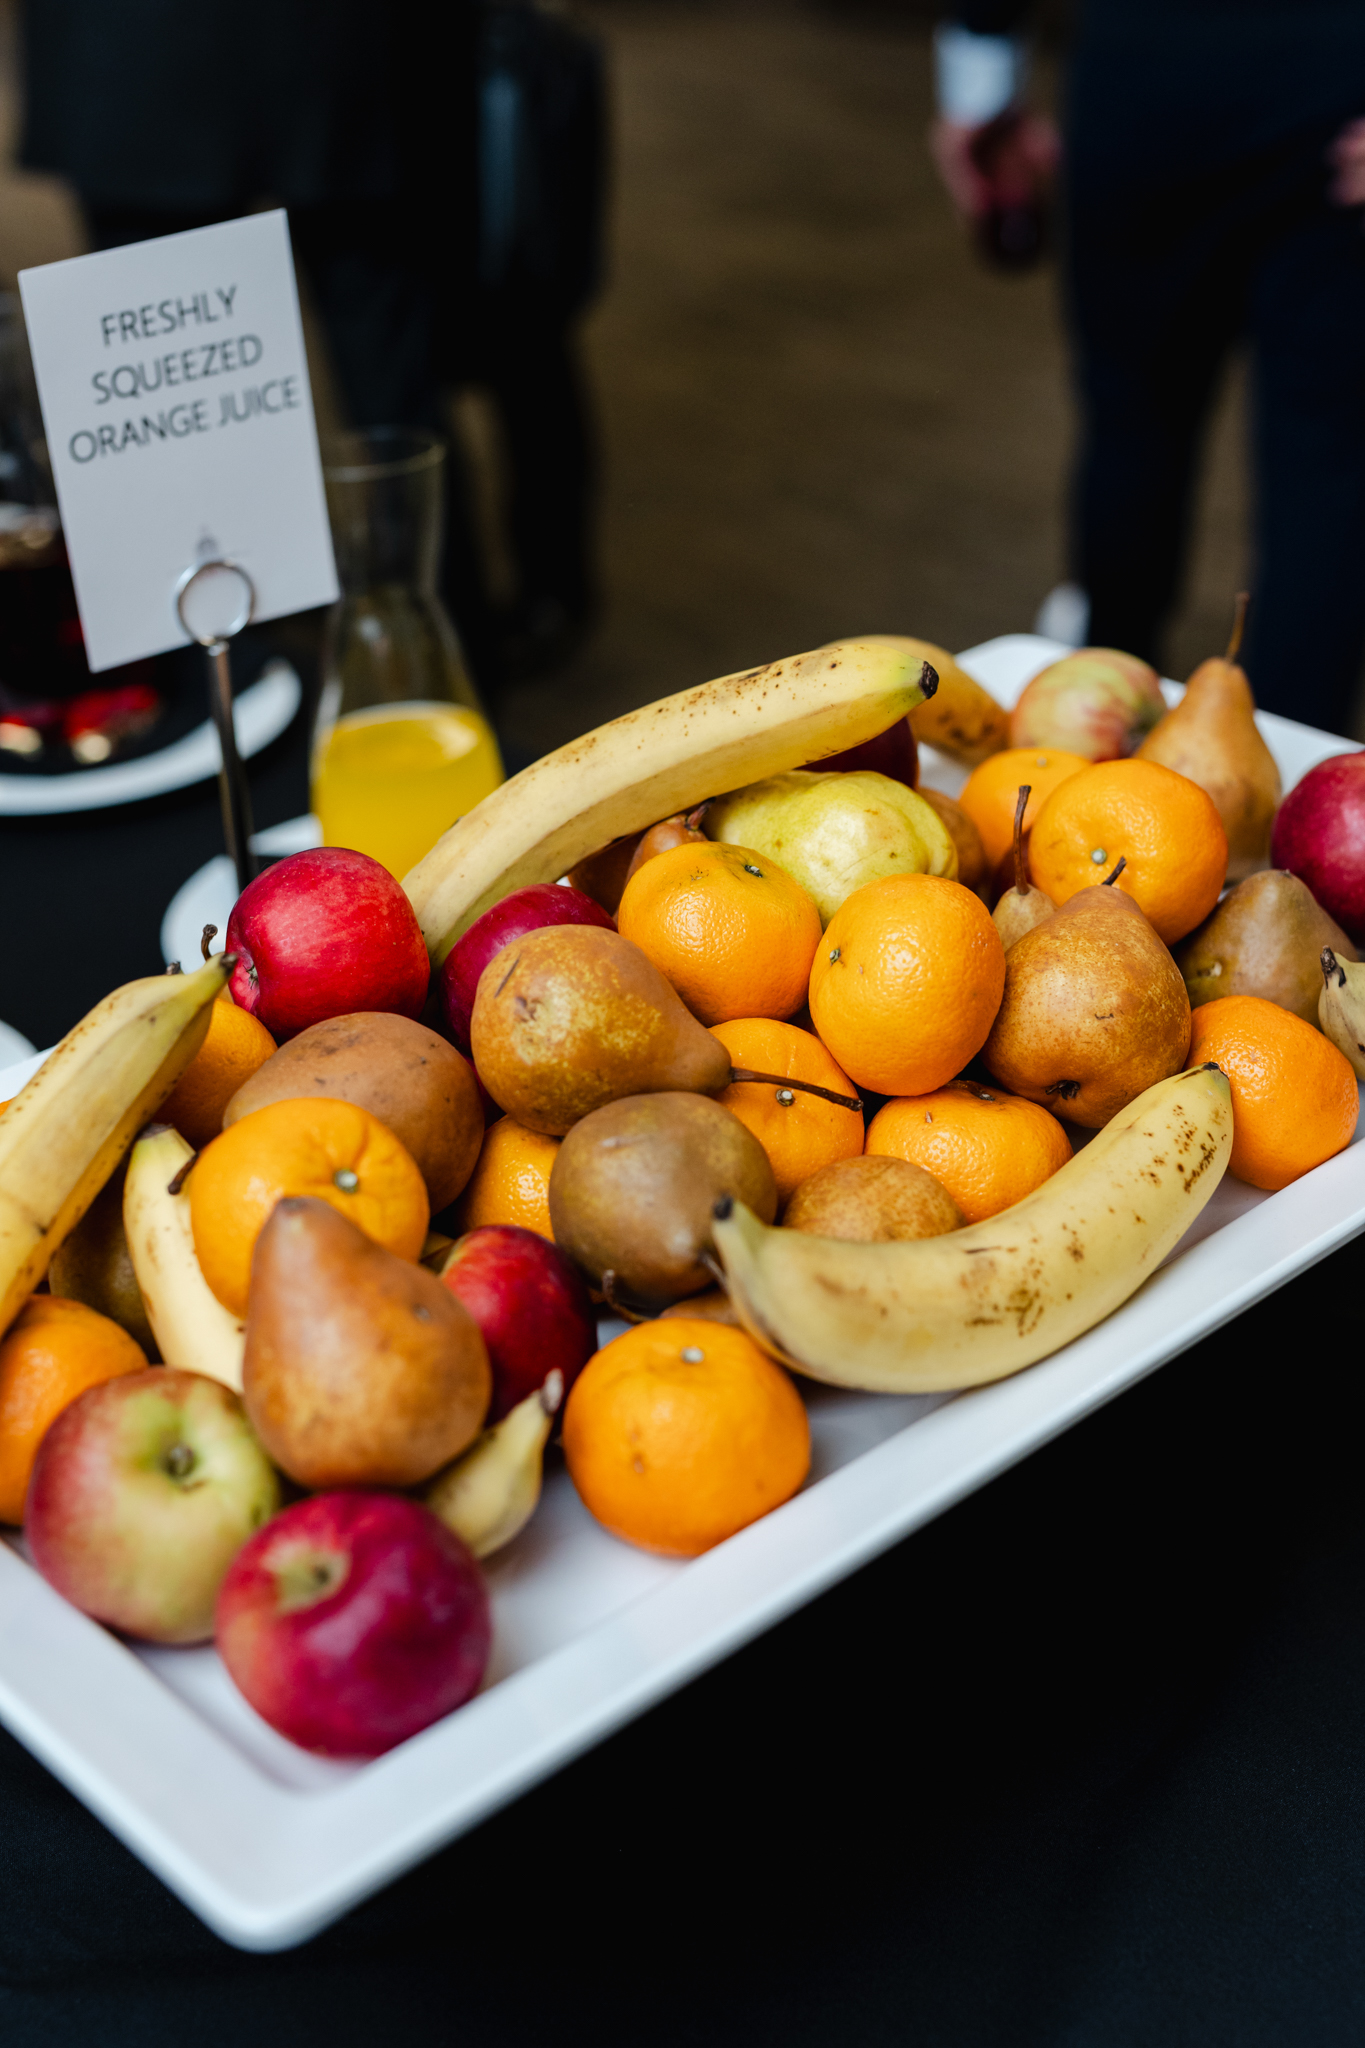 A tray of fruit on a table captured through conference photography.